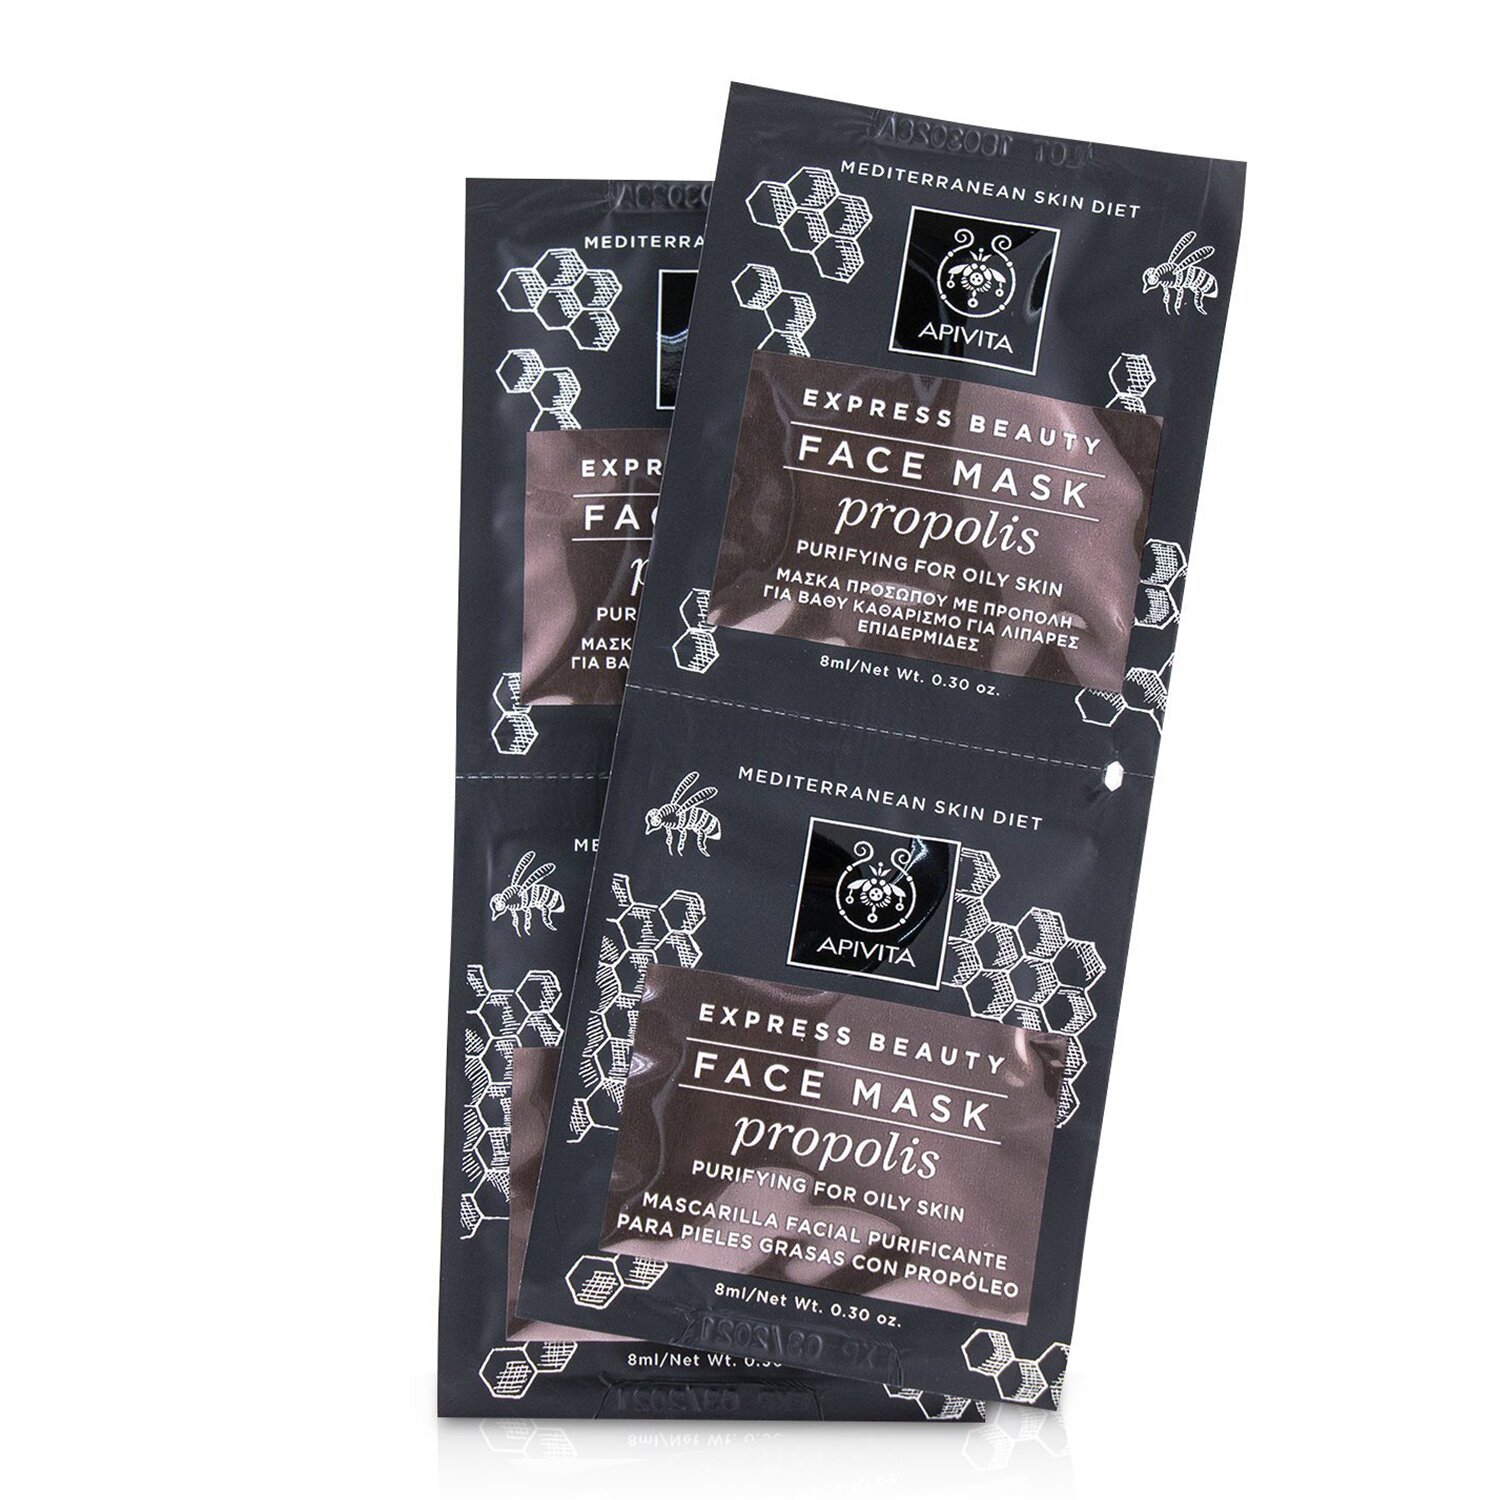 Apivita Express Beauty Face Mask with Propolis (Purifying For Oily Skin) 6x(2x8ml)